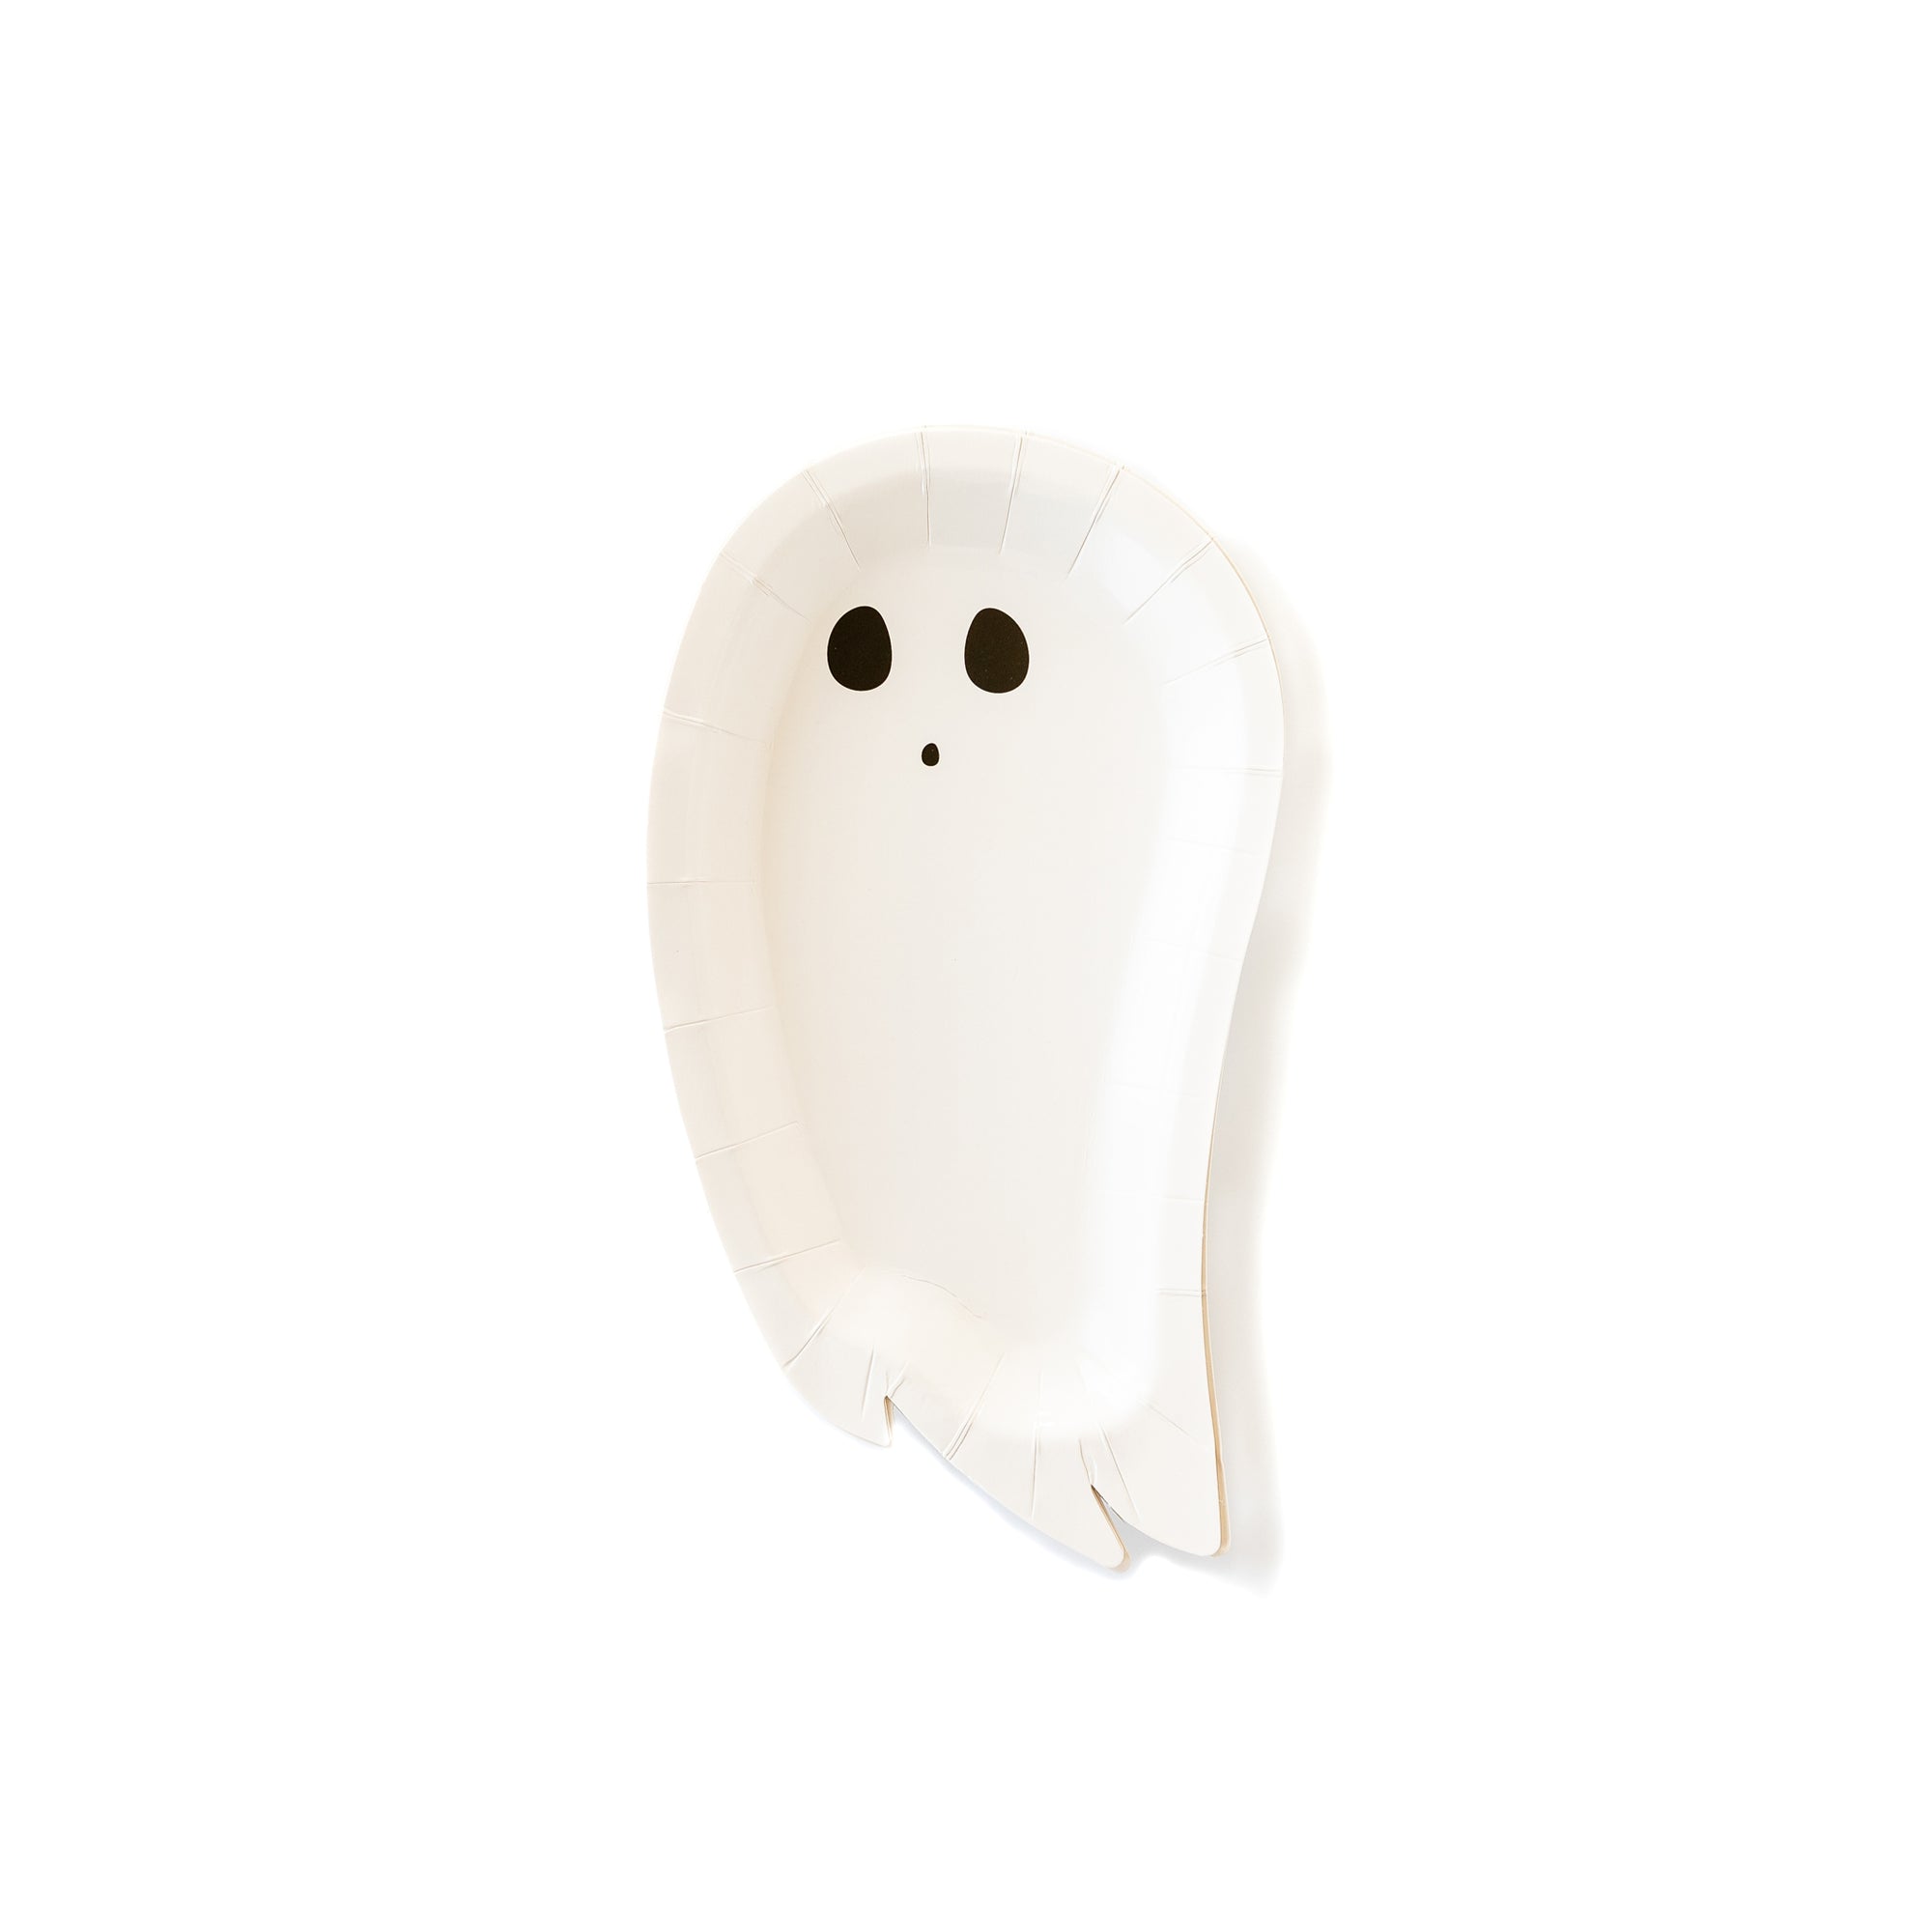 Happy Haunting Ghost Shaped Plates